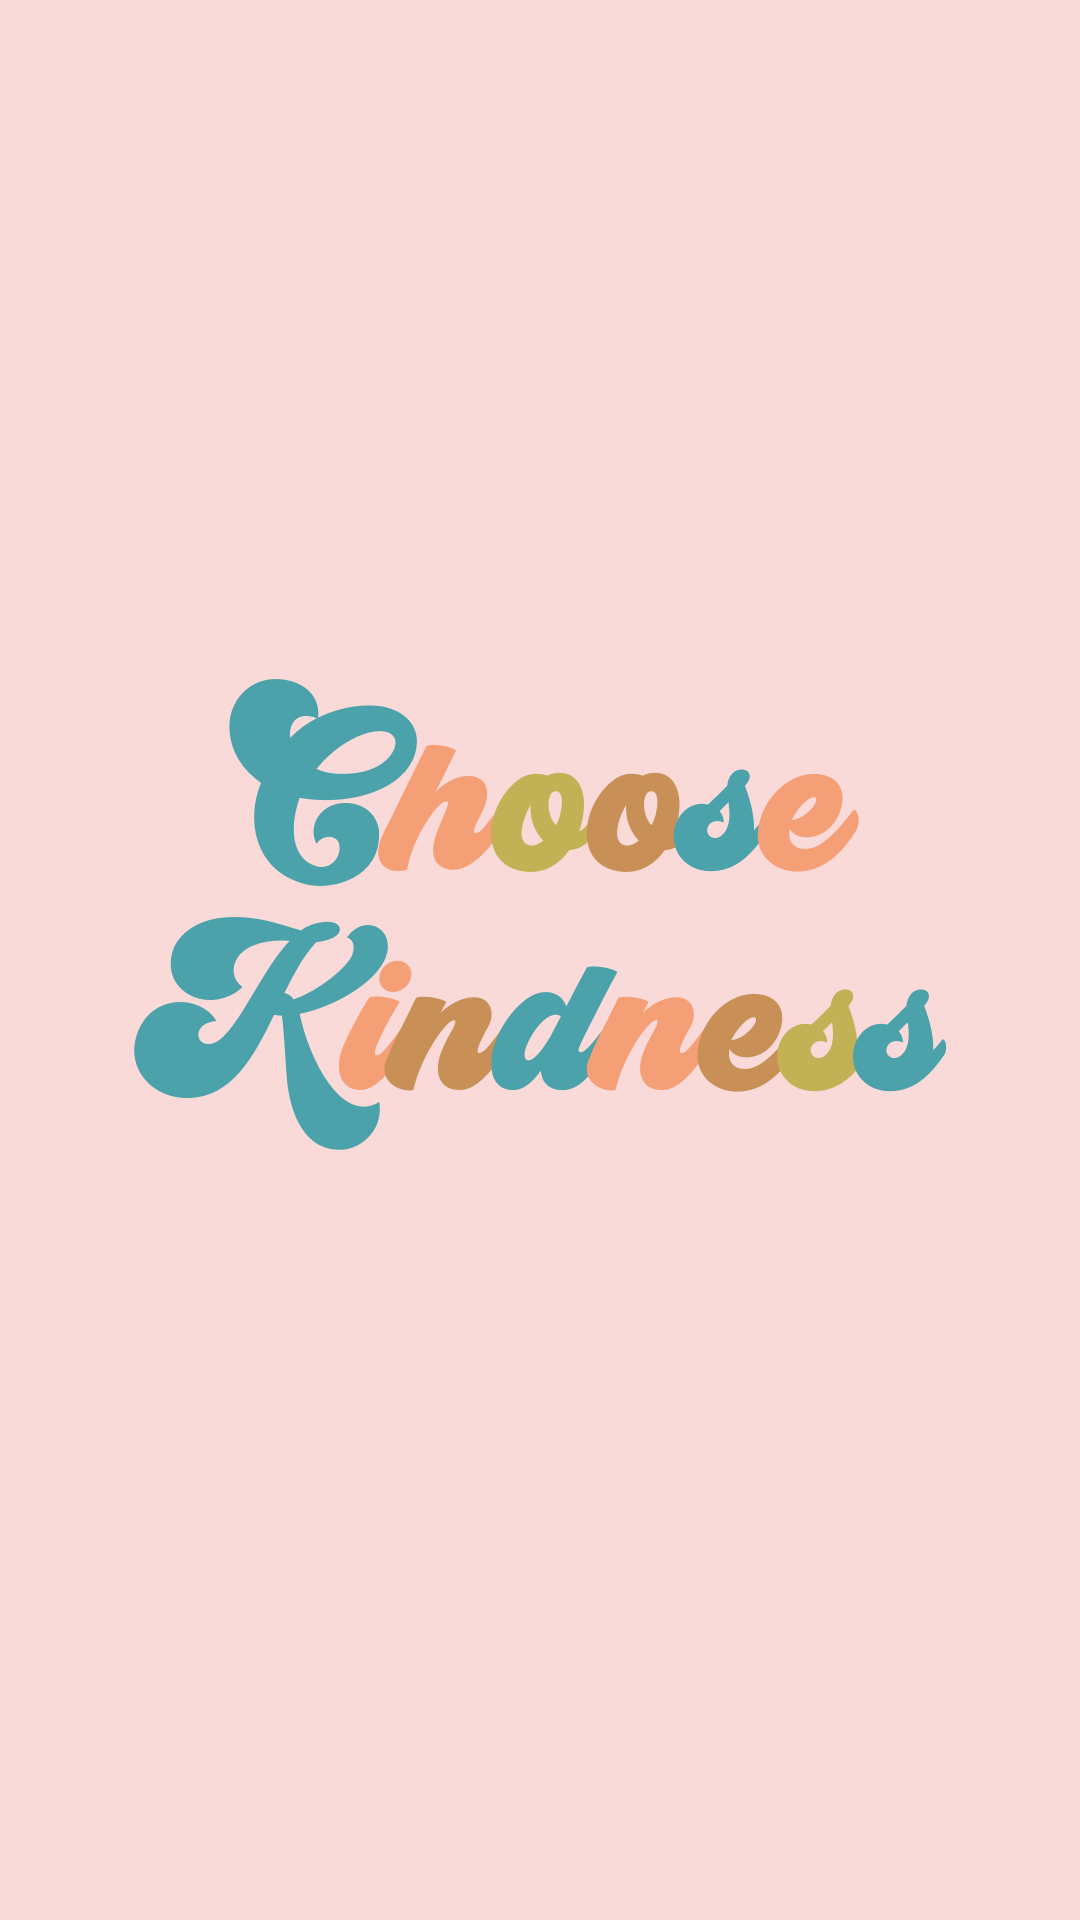 Choose Kindness Tennessee blogger, quotes, daily quotes, lifestyle quotes, daily thoughts, words to li. Apple watch wallpaper, Blogger quotes, Wallpaper quotes